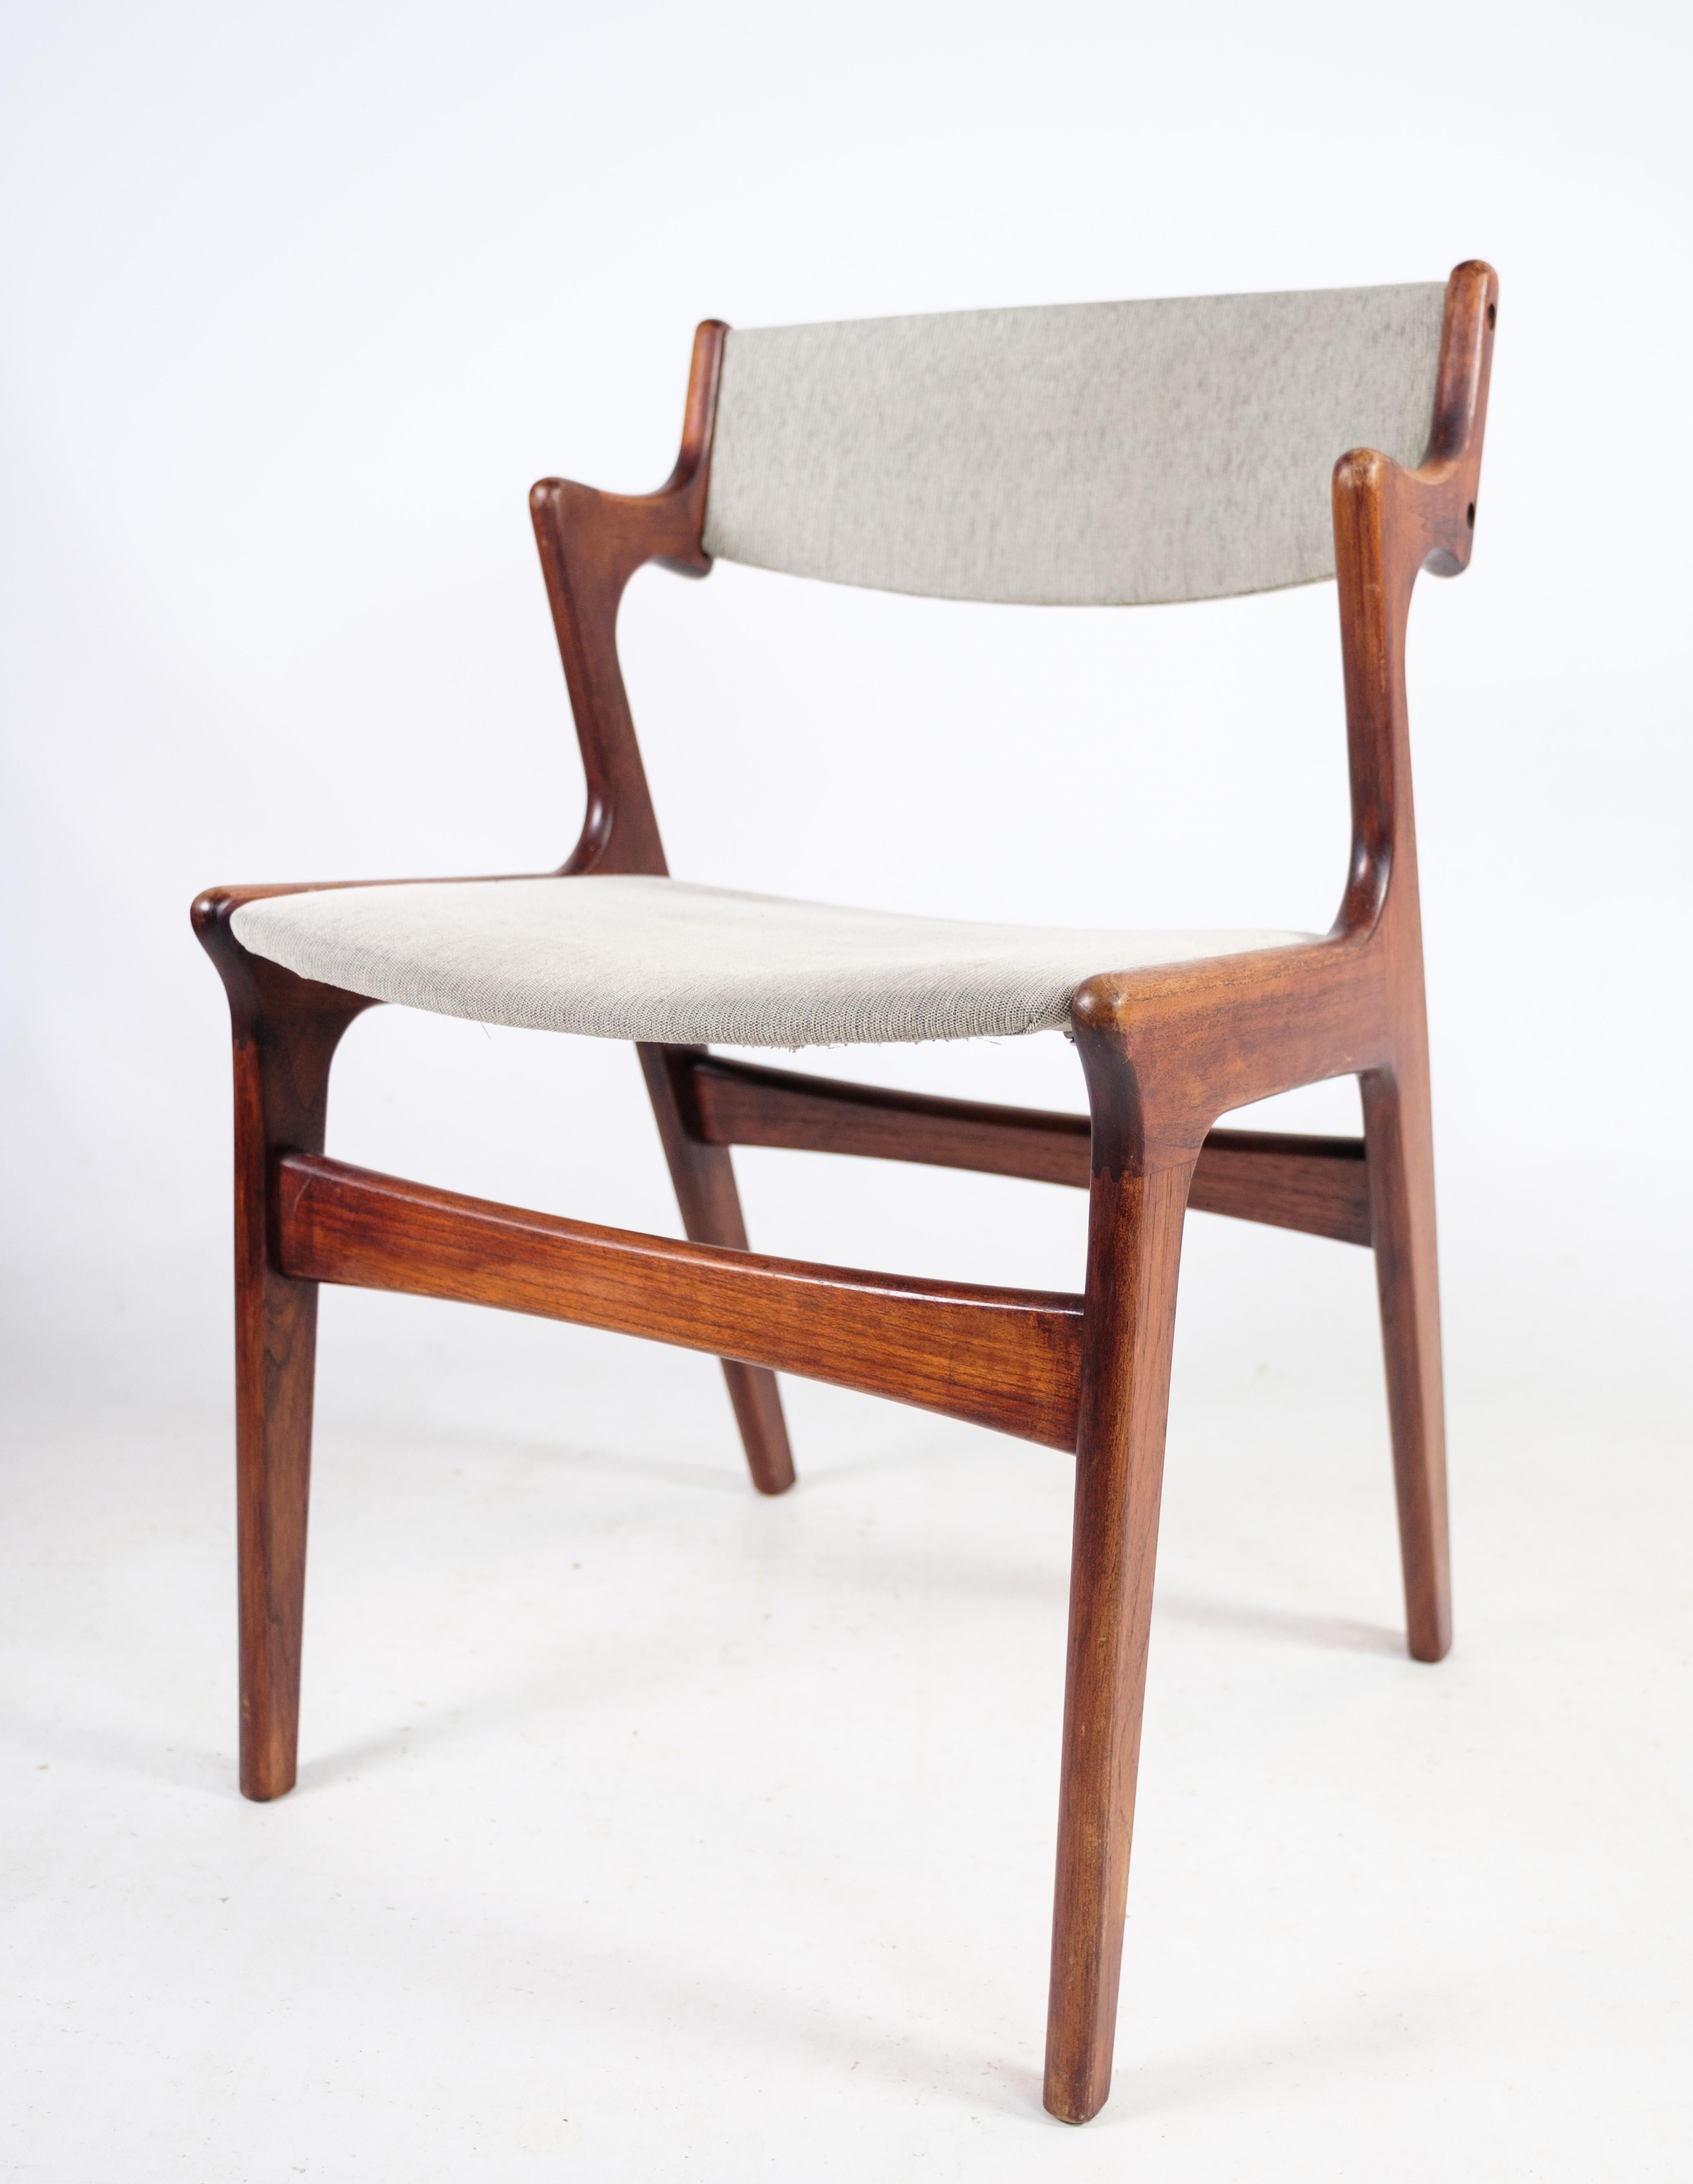 Set of 4 Dining Chairs, Teak, Nova Furniture, 1960s For Sale 9